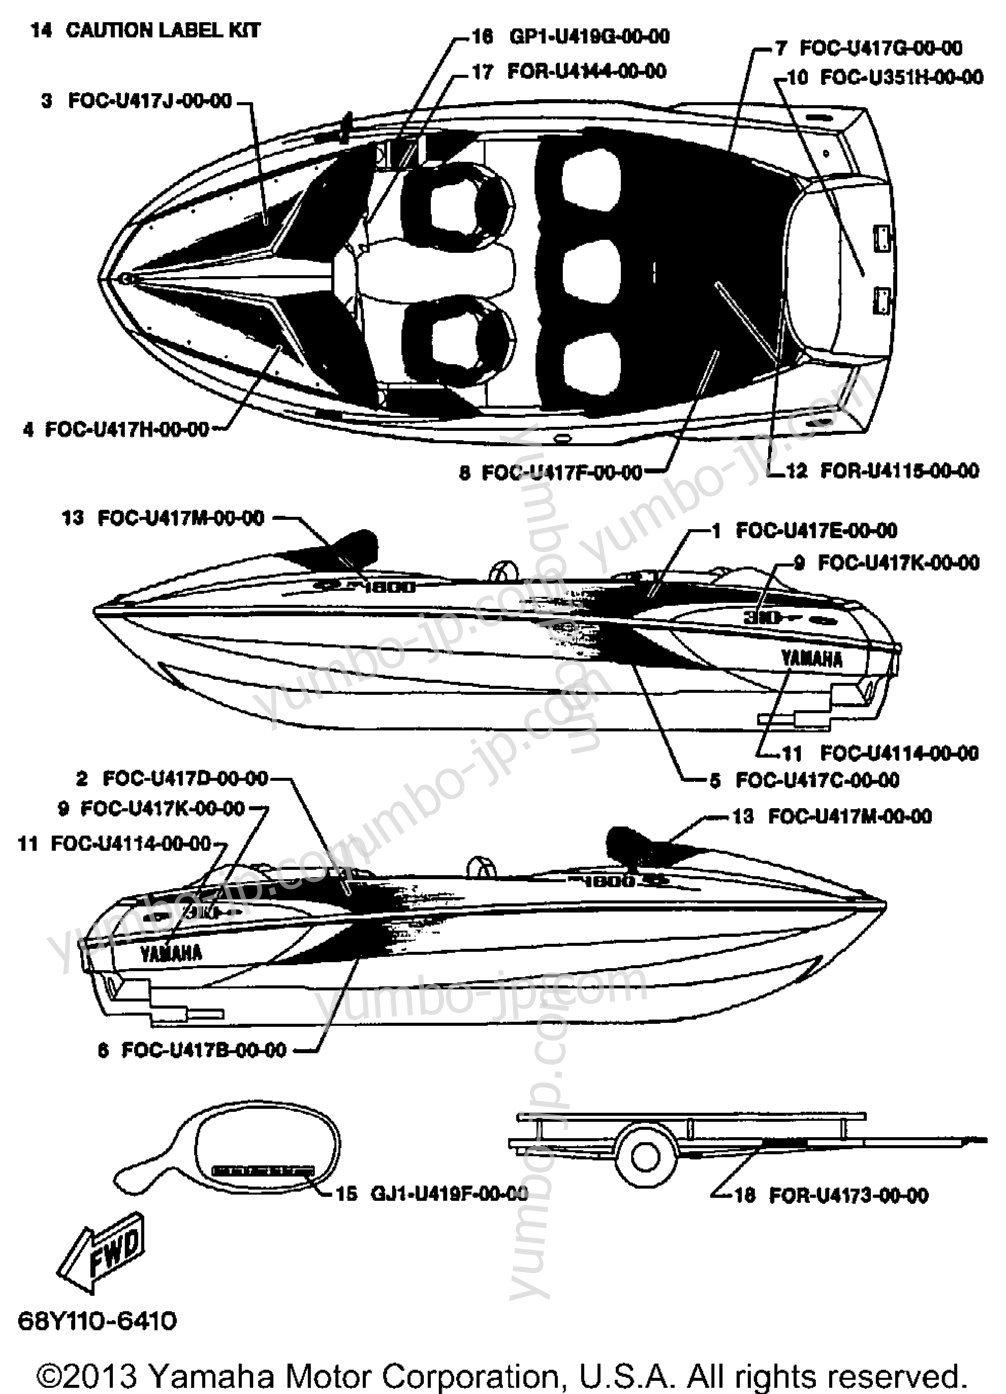 Graphics for boats YAMAHA XR1800 (XRT1200Y) 2000 year